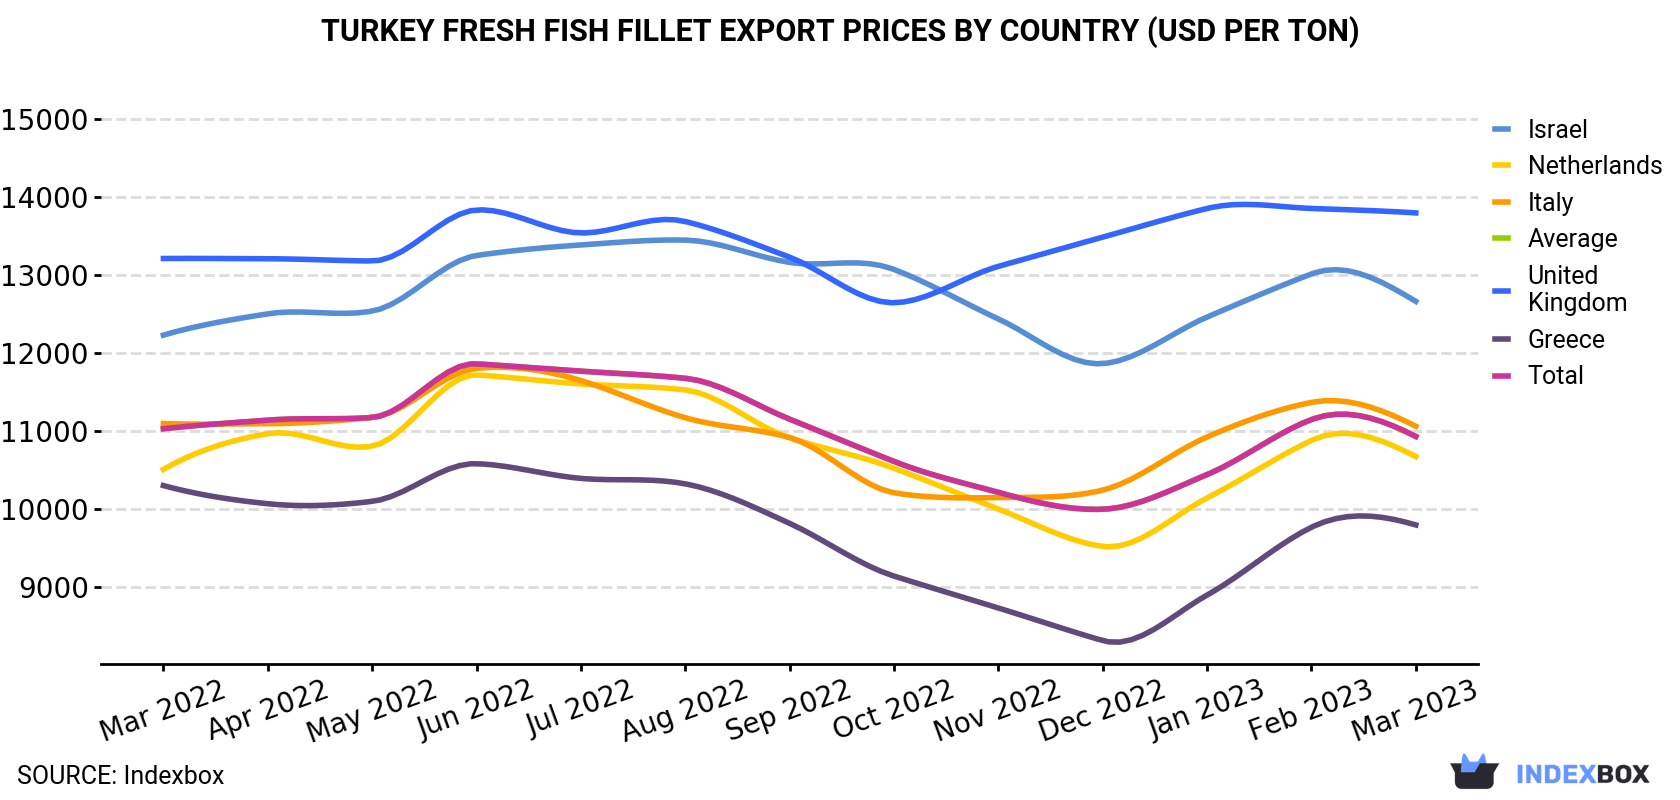 Turkey Fresh Fish Fillet Export Prices By Country (USD Per Ton)